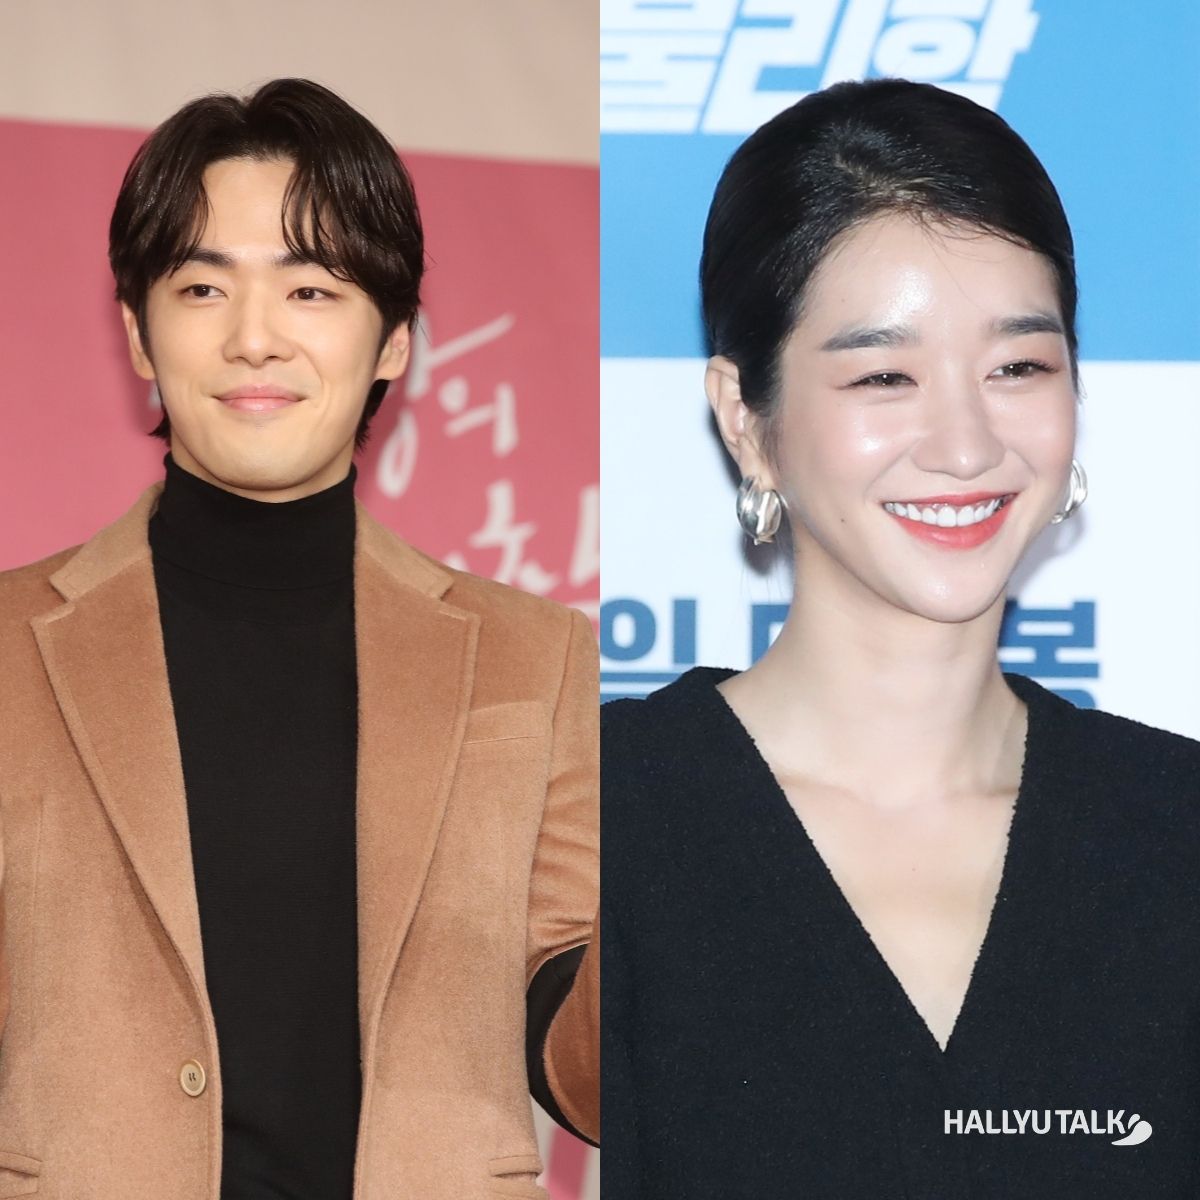 Kim Jung Hyun Vs Seo Yea Ji: Important Lessons In Mental Health We Need To  Take From This Viral Controversy | Pinkvilla: Korean